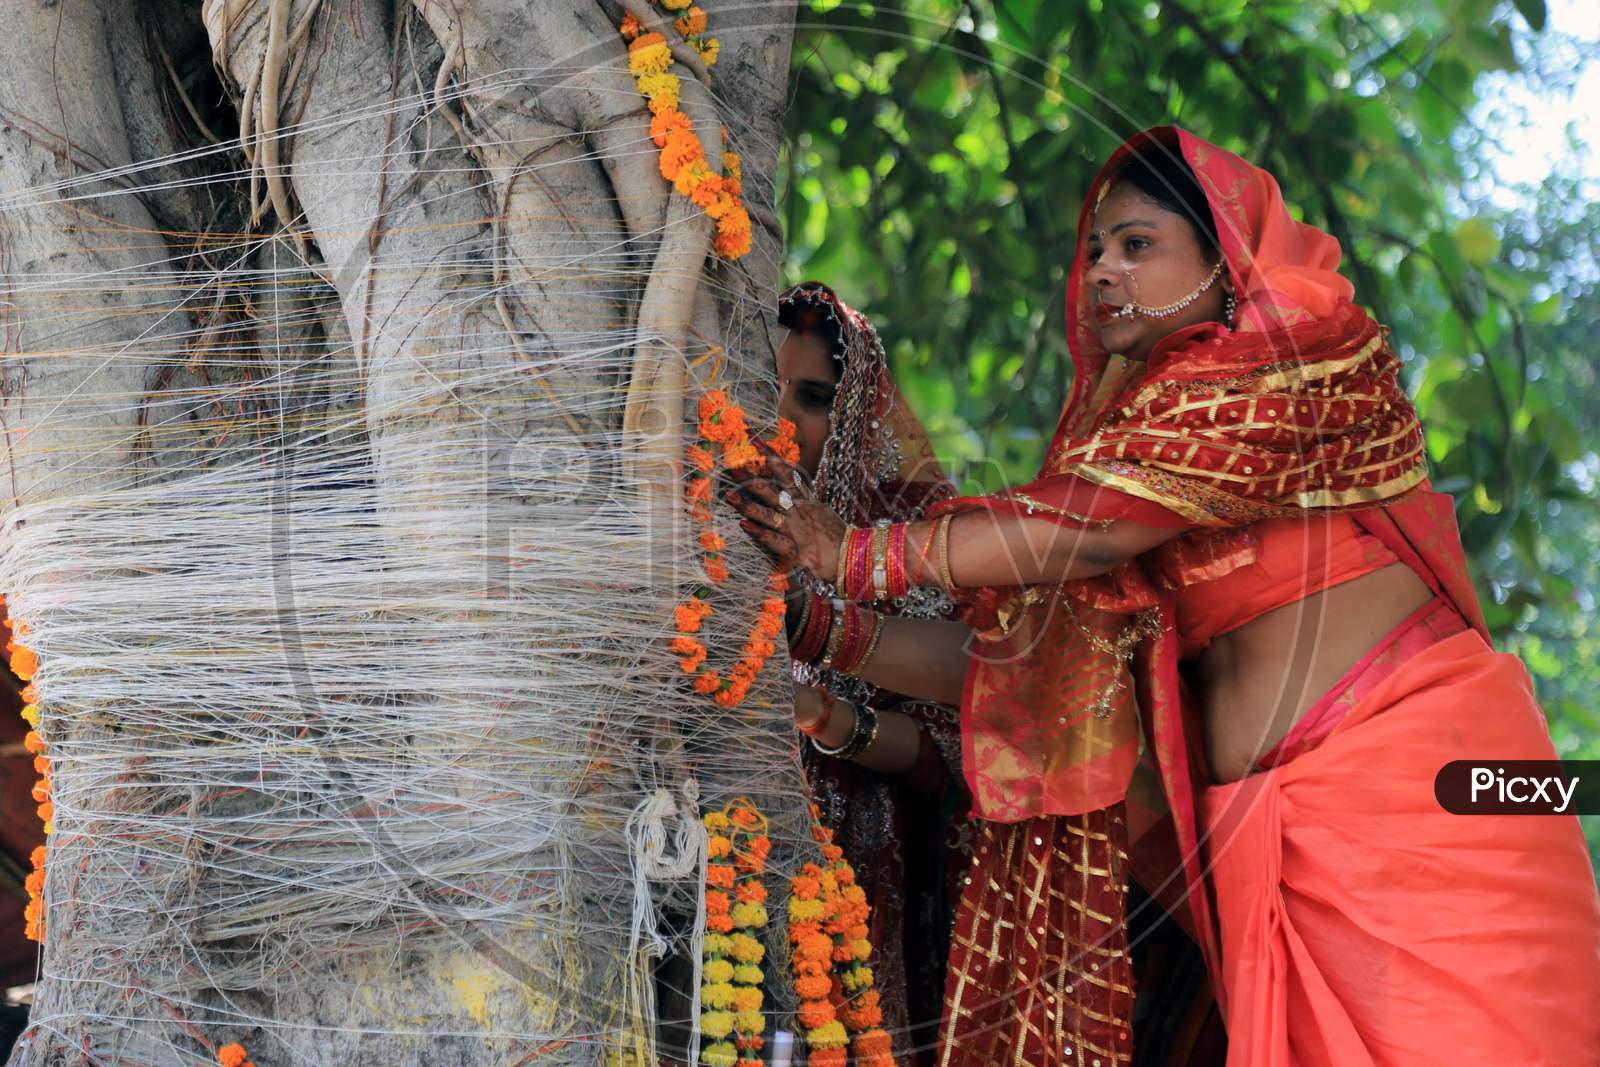 Married Hindu Women Pray After Tying Cotton Threads Around A Banyan Tree On The Occasion Of "Vat Savitri Festival", For Their Husbands' Health And Longevity, In Prayagraj, May 22, 2020.